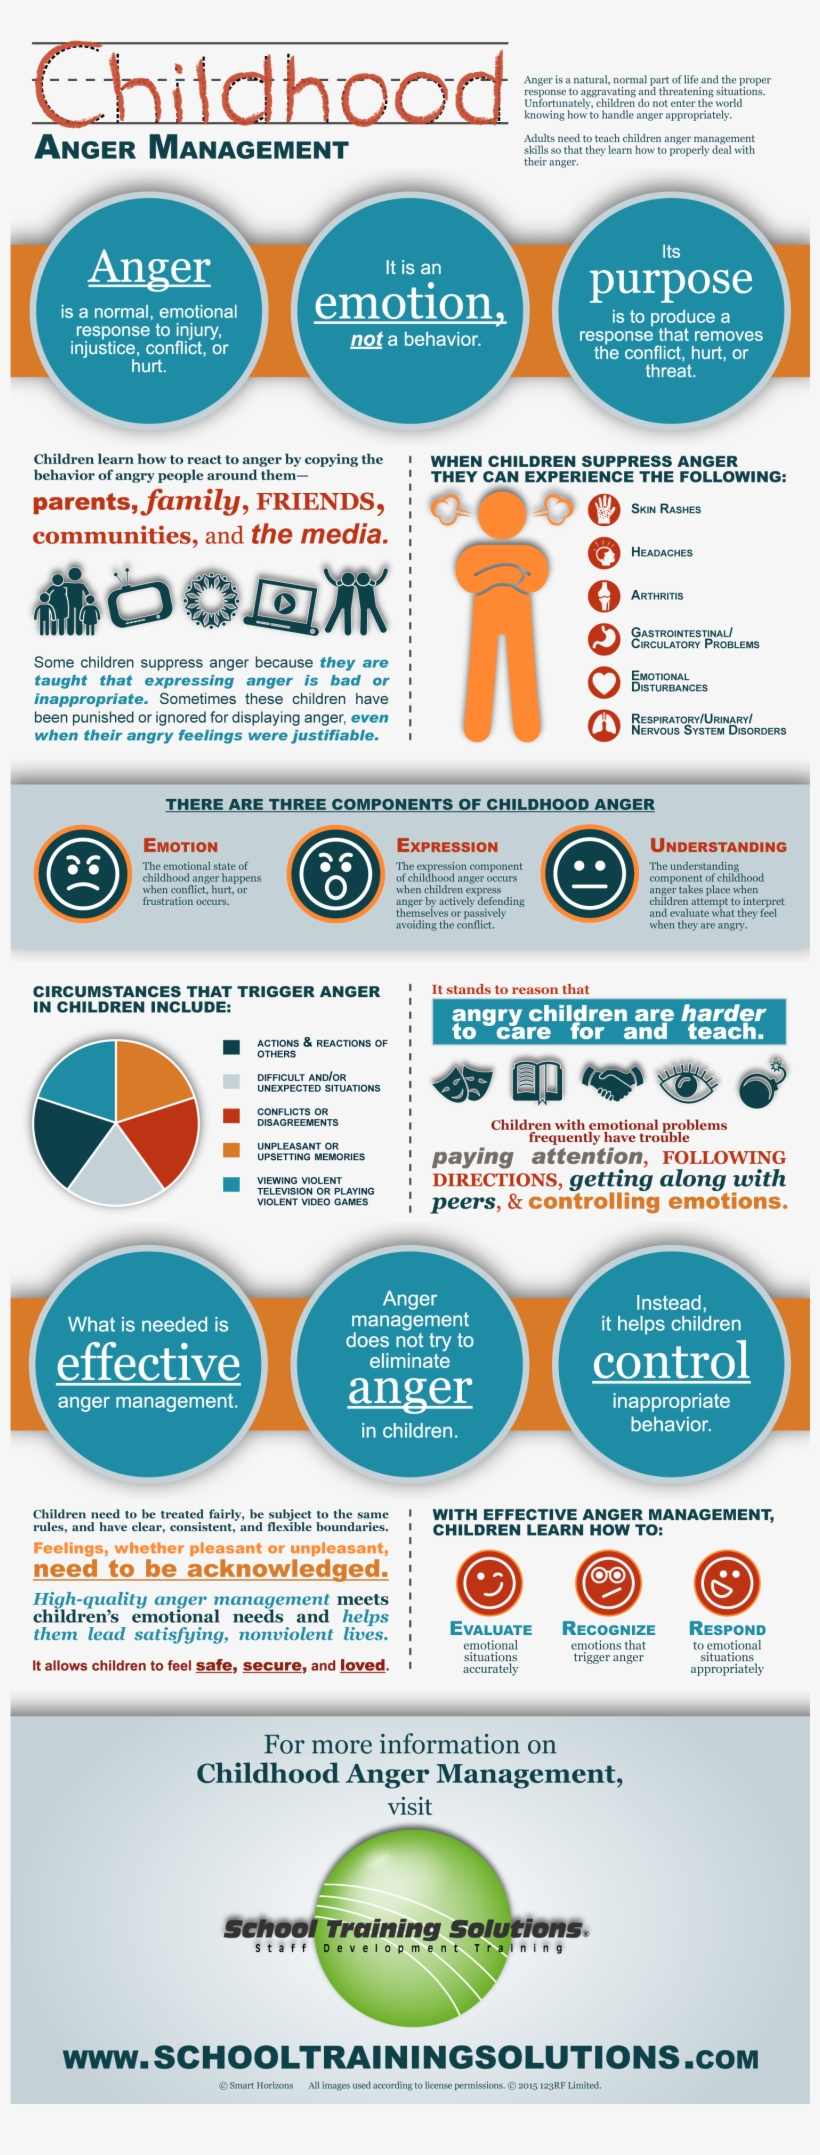 School Training Solutions Anger Management Infographic - Conflict Resolution Infographic School, transparent png #4267872